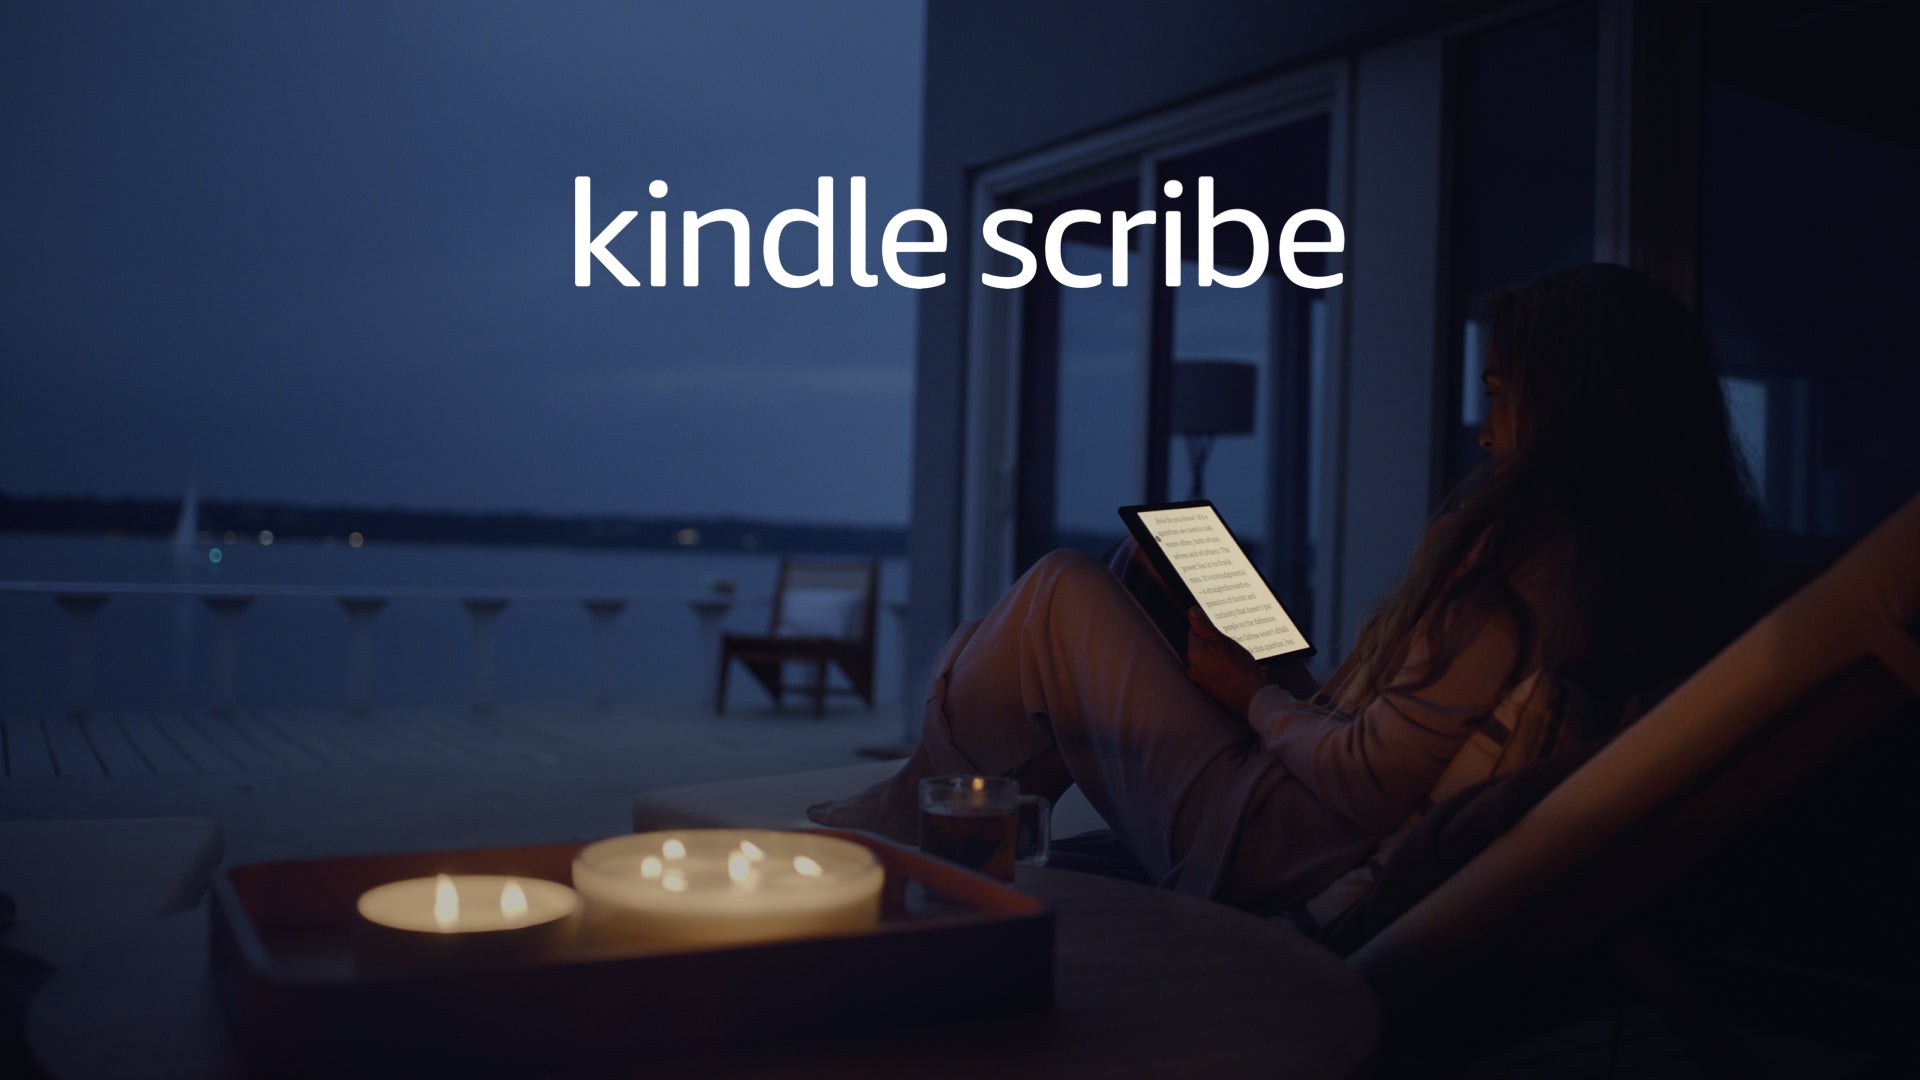 Amazon Kindle Scribe (16 GB) the first Kindle and digital notebook, all in one, with a 10.2” 300 ppi Paperwhite display, includes Basic Pen